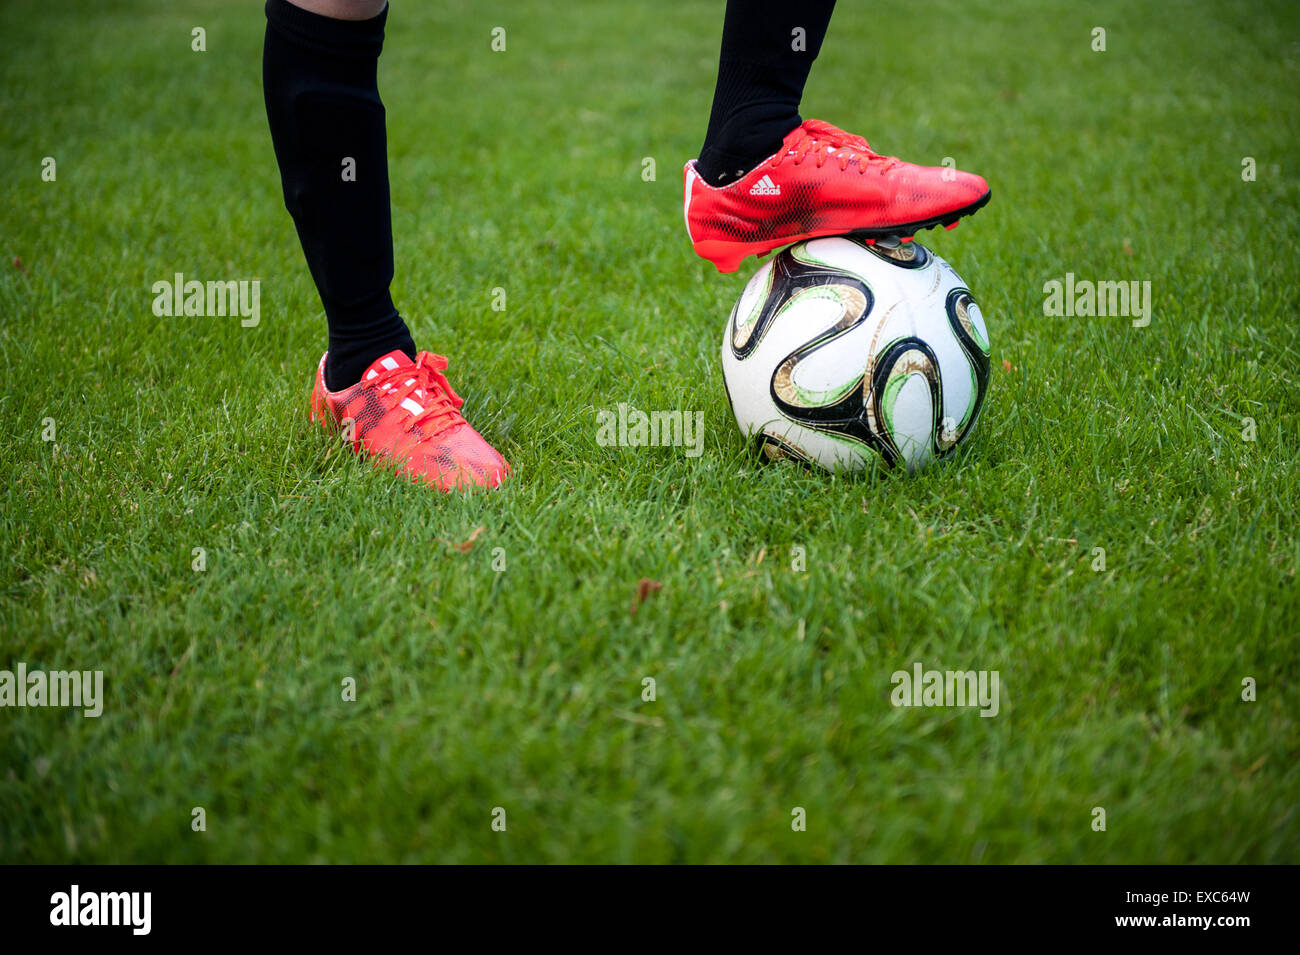 Close up of a young boy with his foot on a football Stock Photo